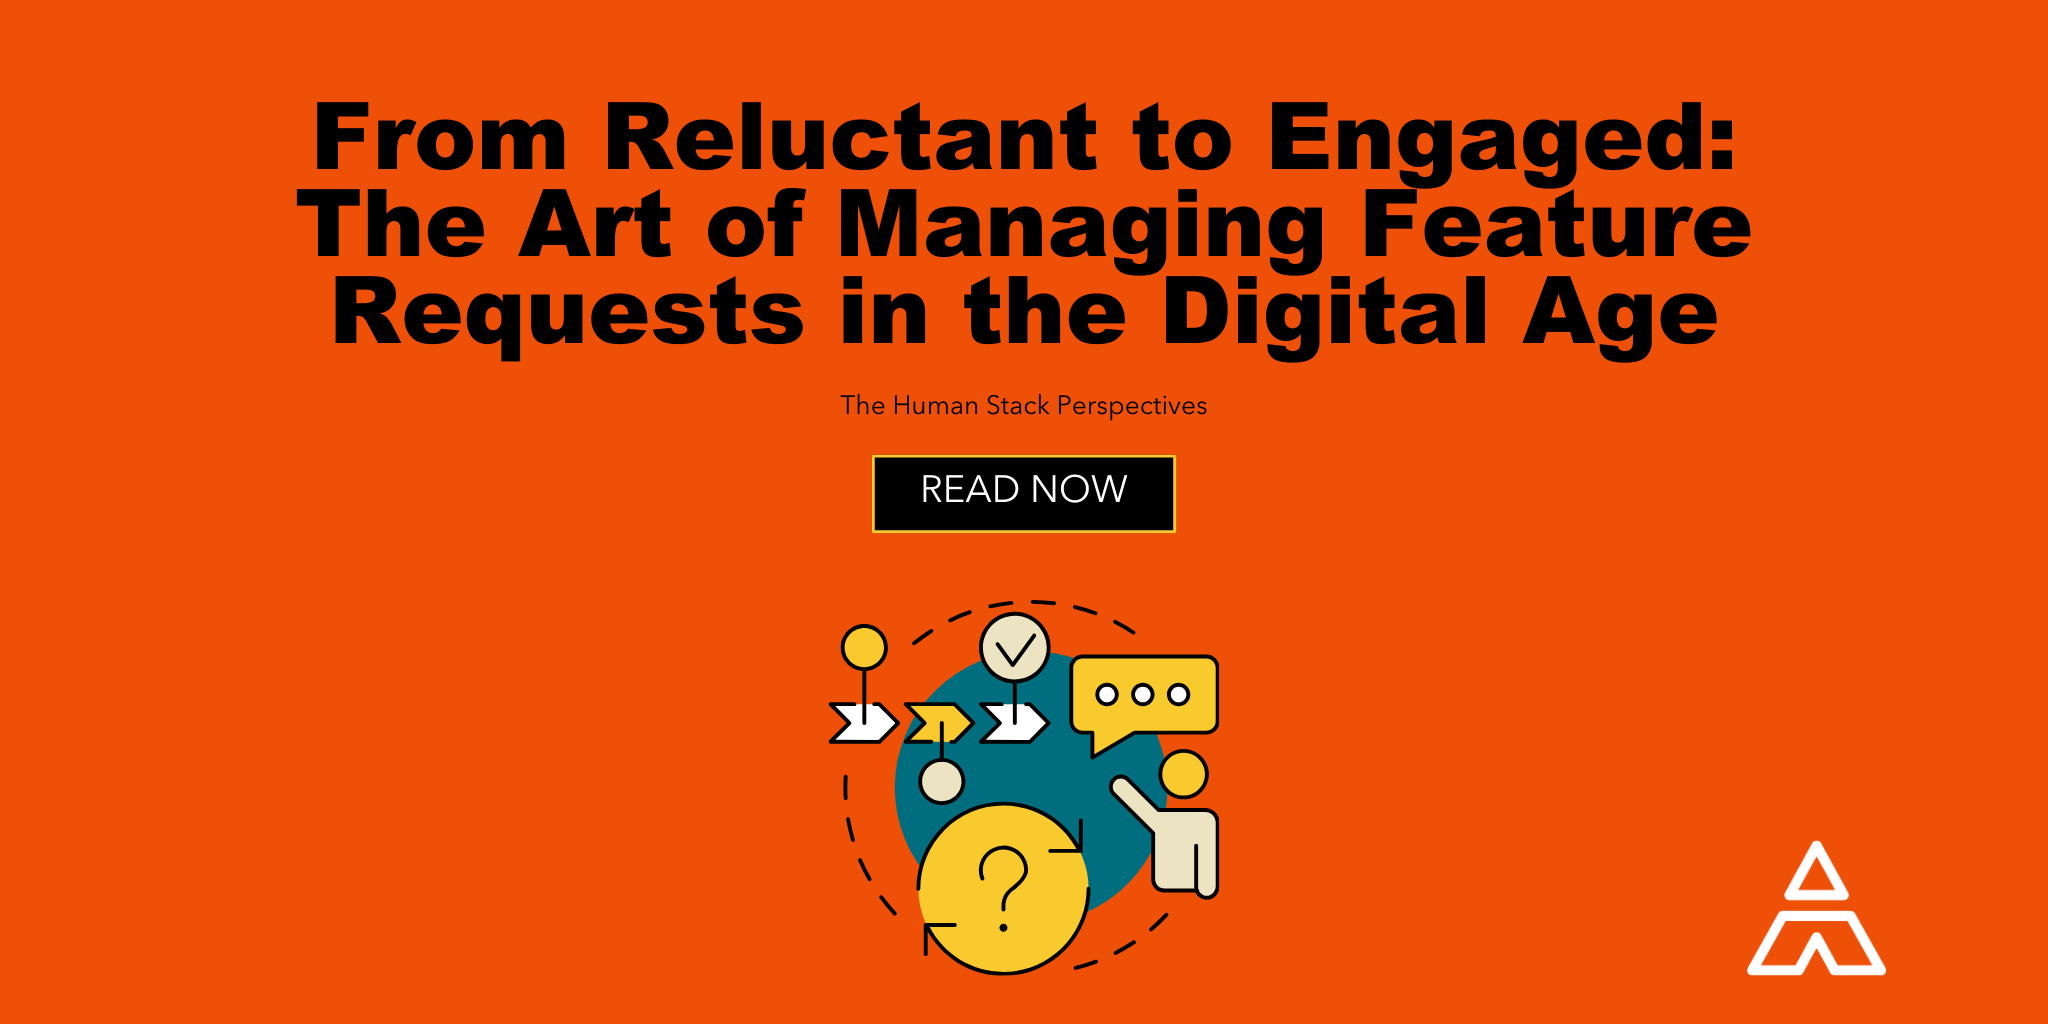 From Reluctant to Engaged: The Art of Managing Feature Requests in the Digital Age